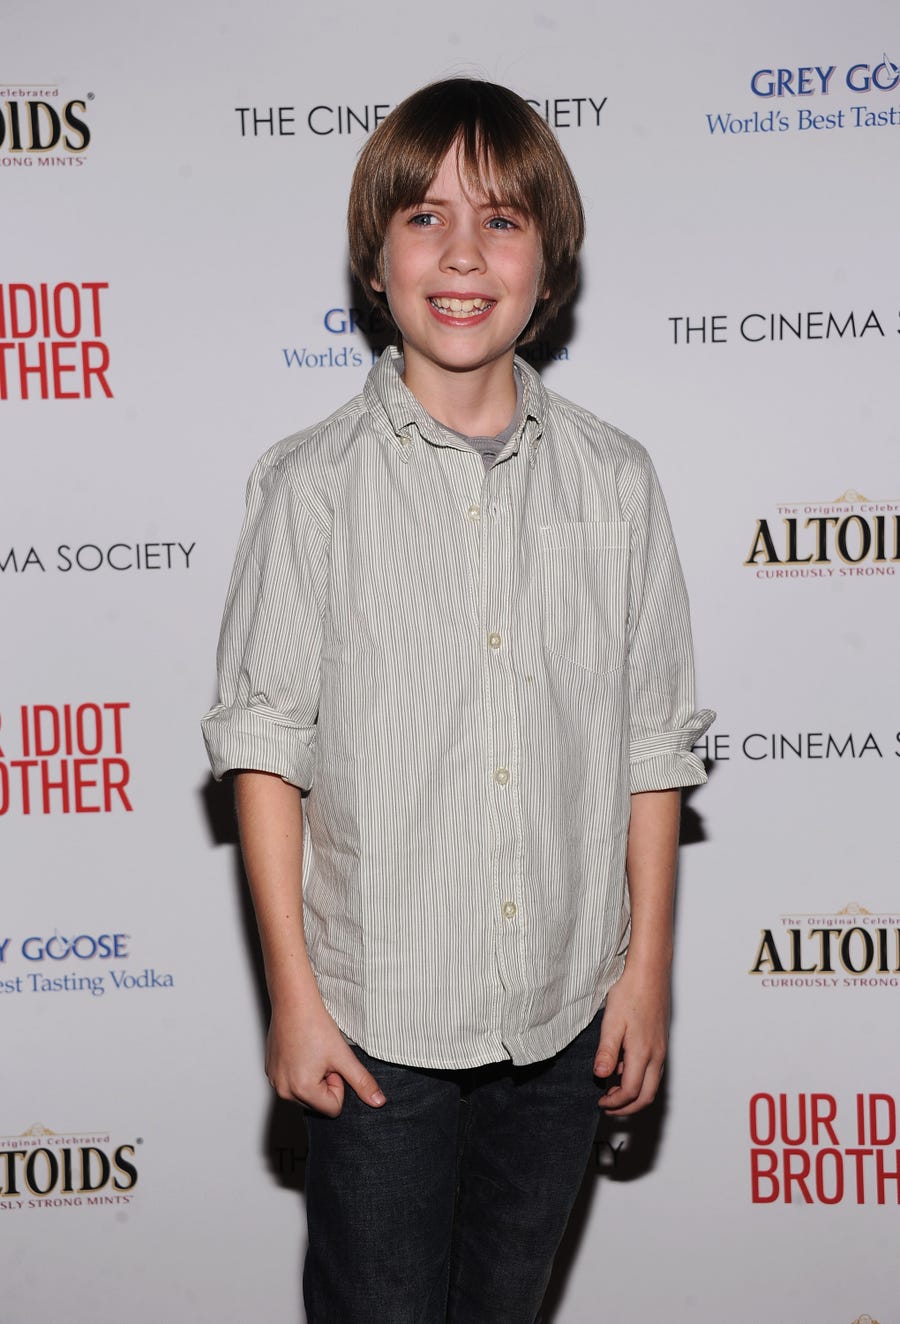 In this file photo, Matthew Mindler attends The Cinema Society & Altoids screening of The Weinstein Company's "Our Idiot Brother" at 1 MiMA Tower on August 22, 2011 in New York City.